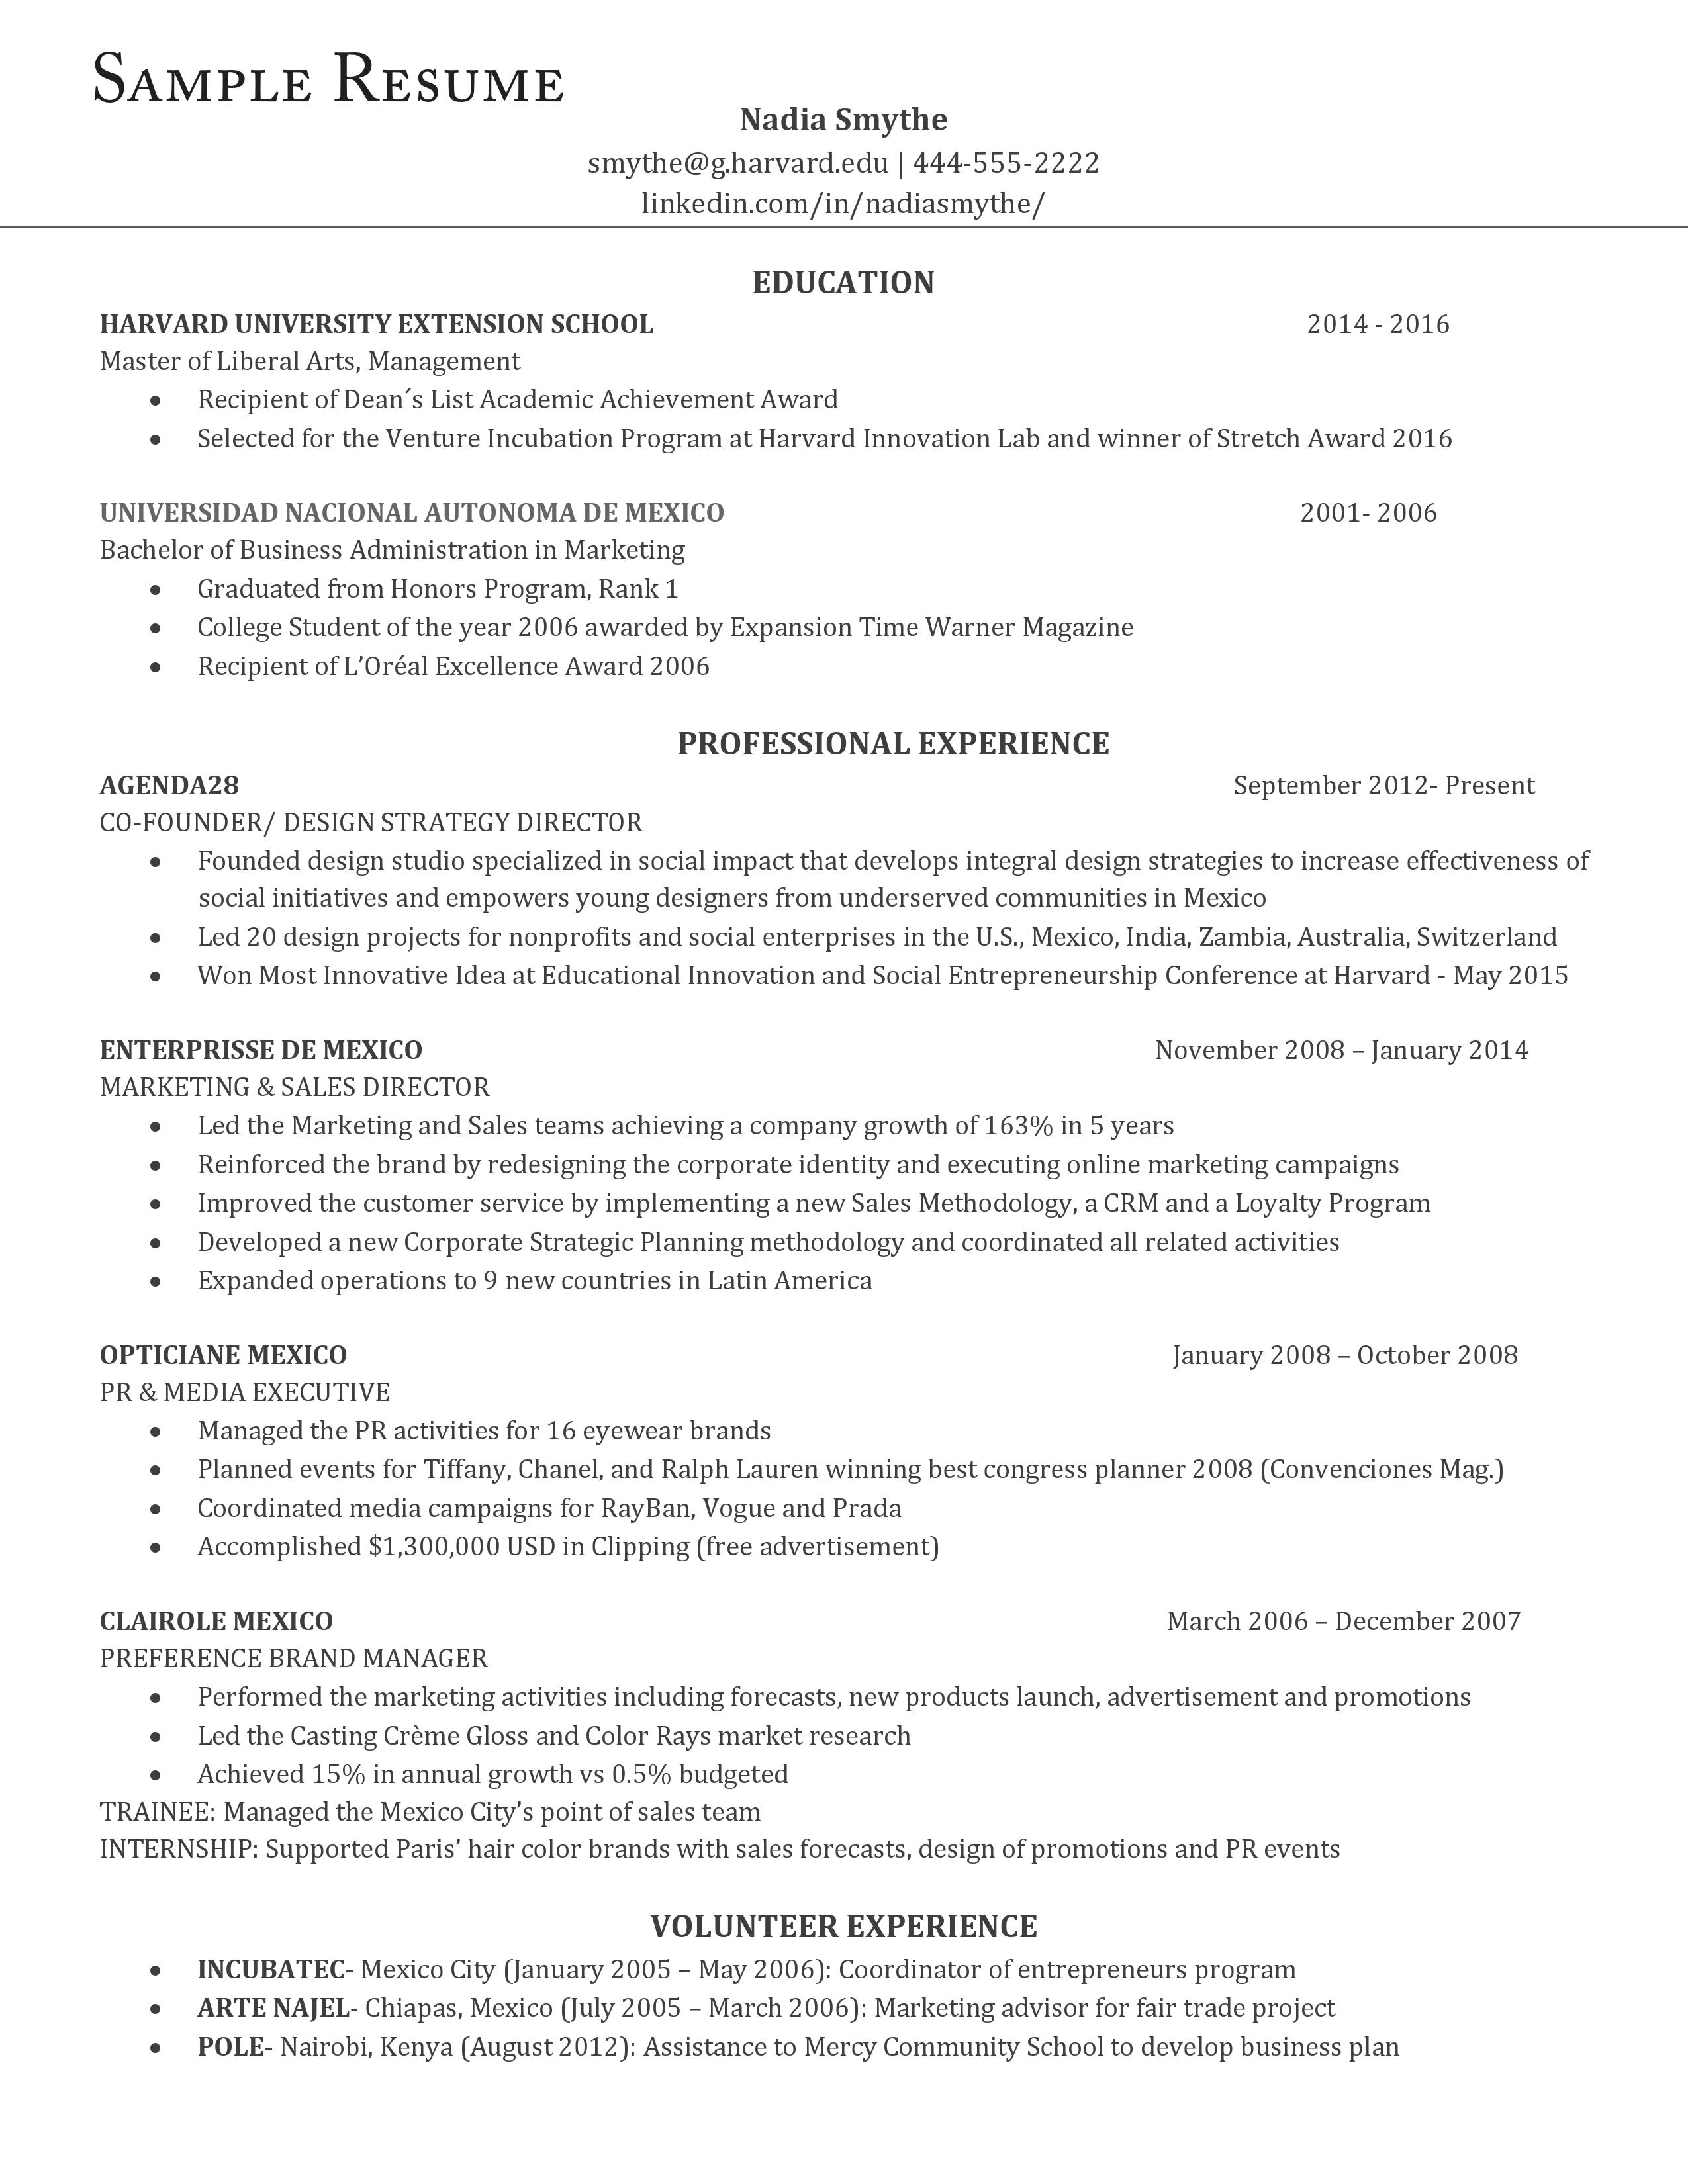 10 Years Experience Resume Format from fm-static.cnbc.com